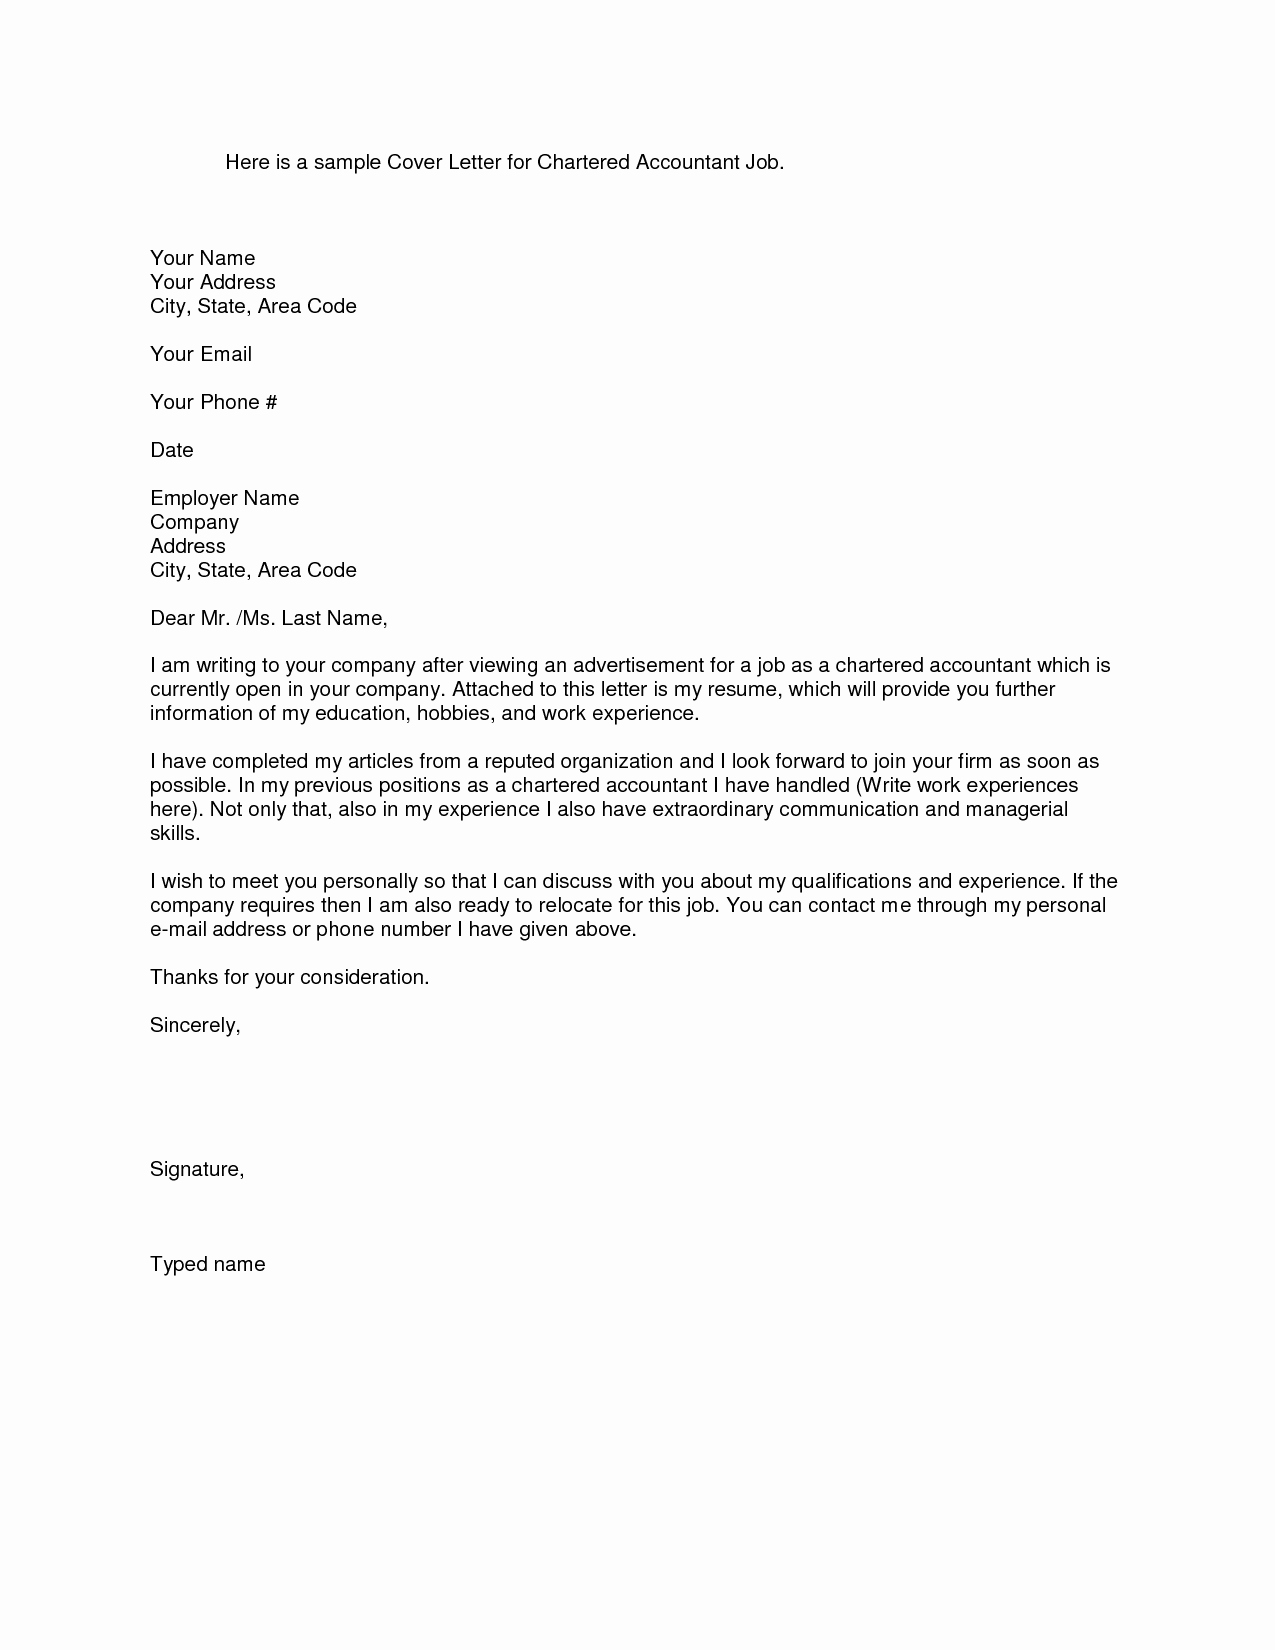 Sample Job Cover Letter Best Of the Cover Letter is to Have A Great Impact is A Piece Of